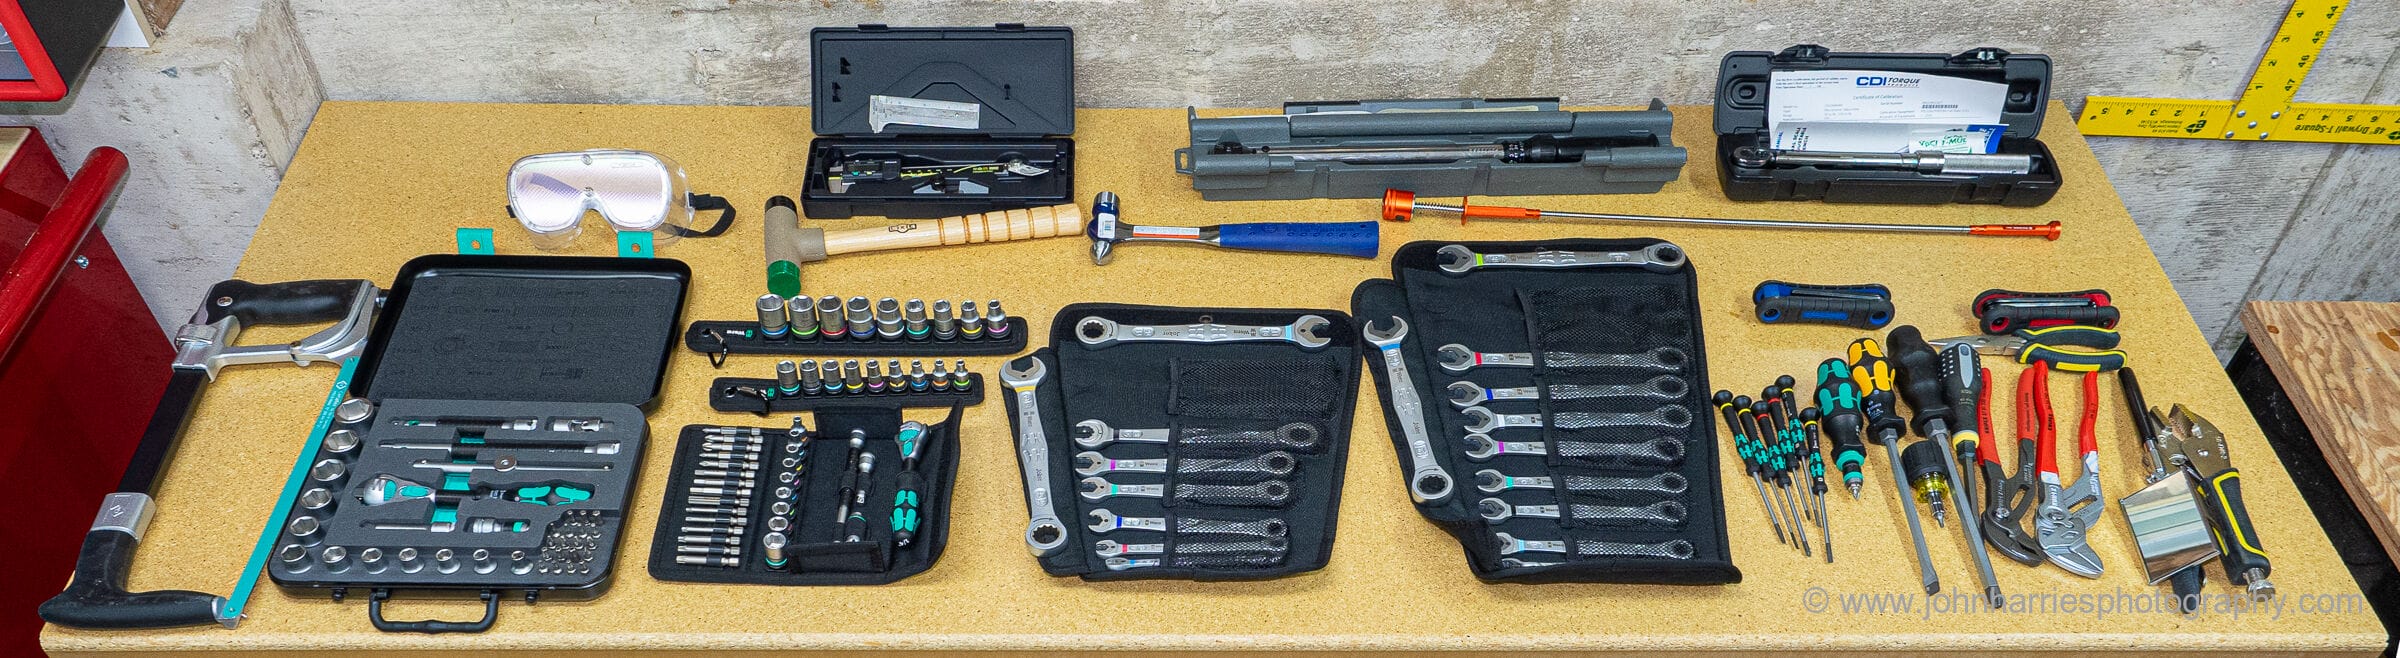 A Real World Tested Tool Kit For Cruisers - Attainable Adventure Cruising